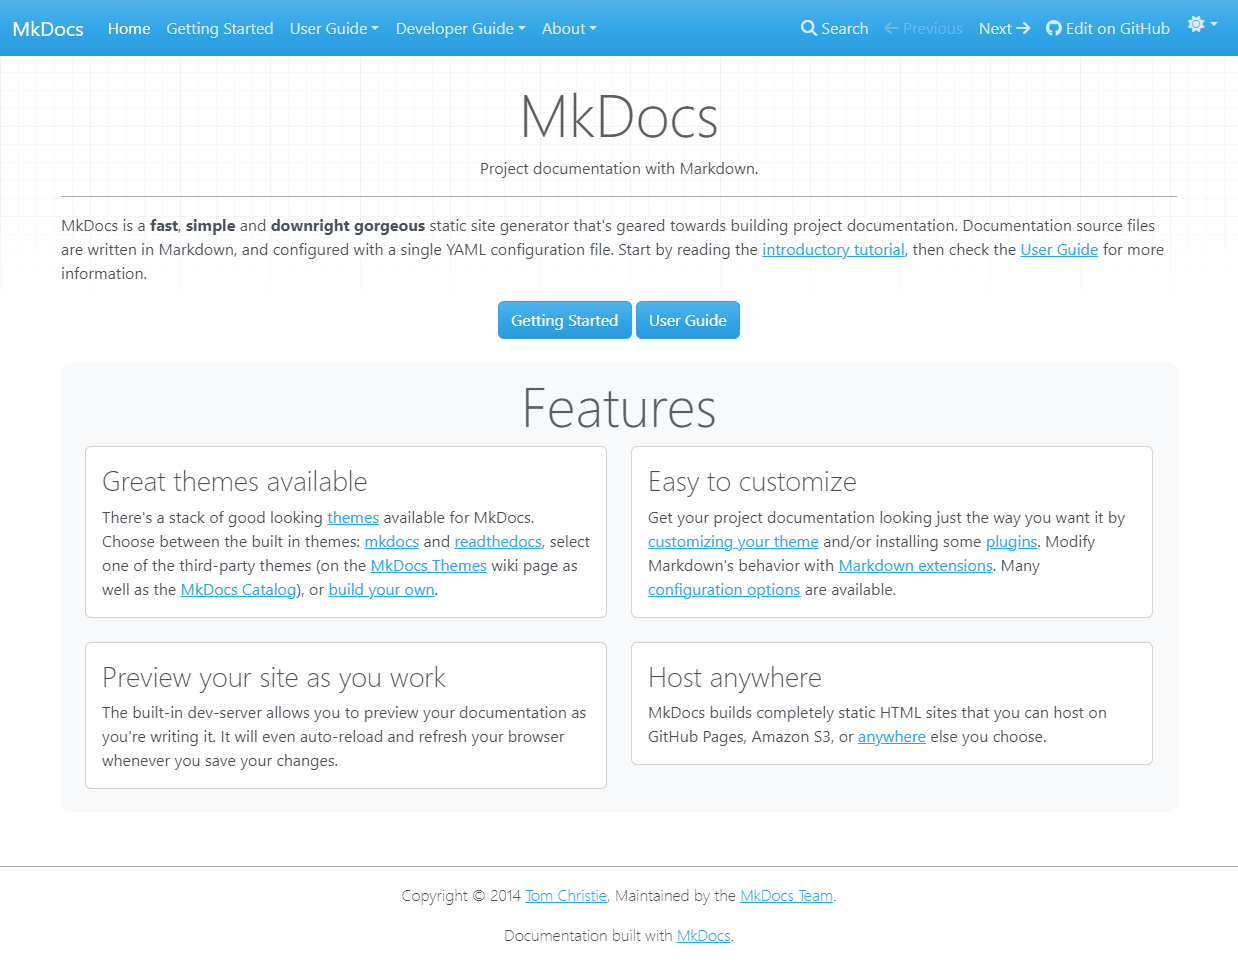 MkDocs theme in light mode